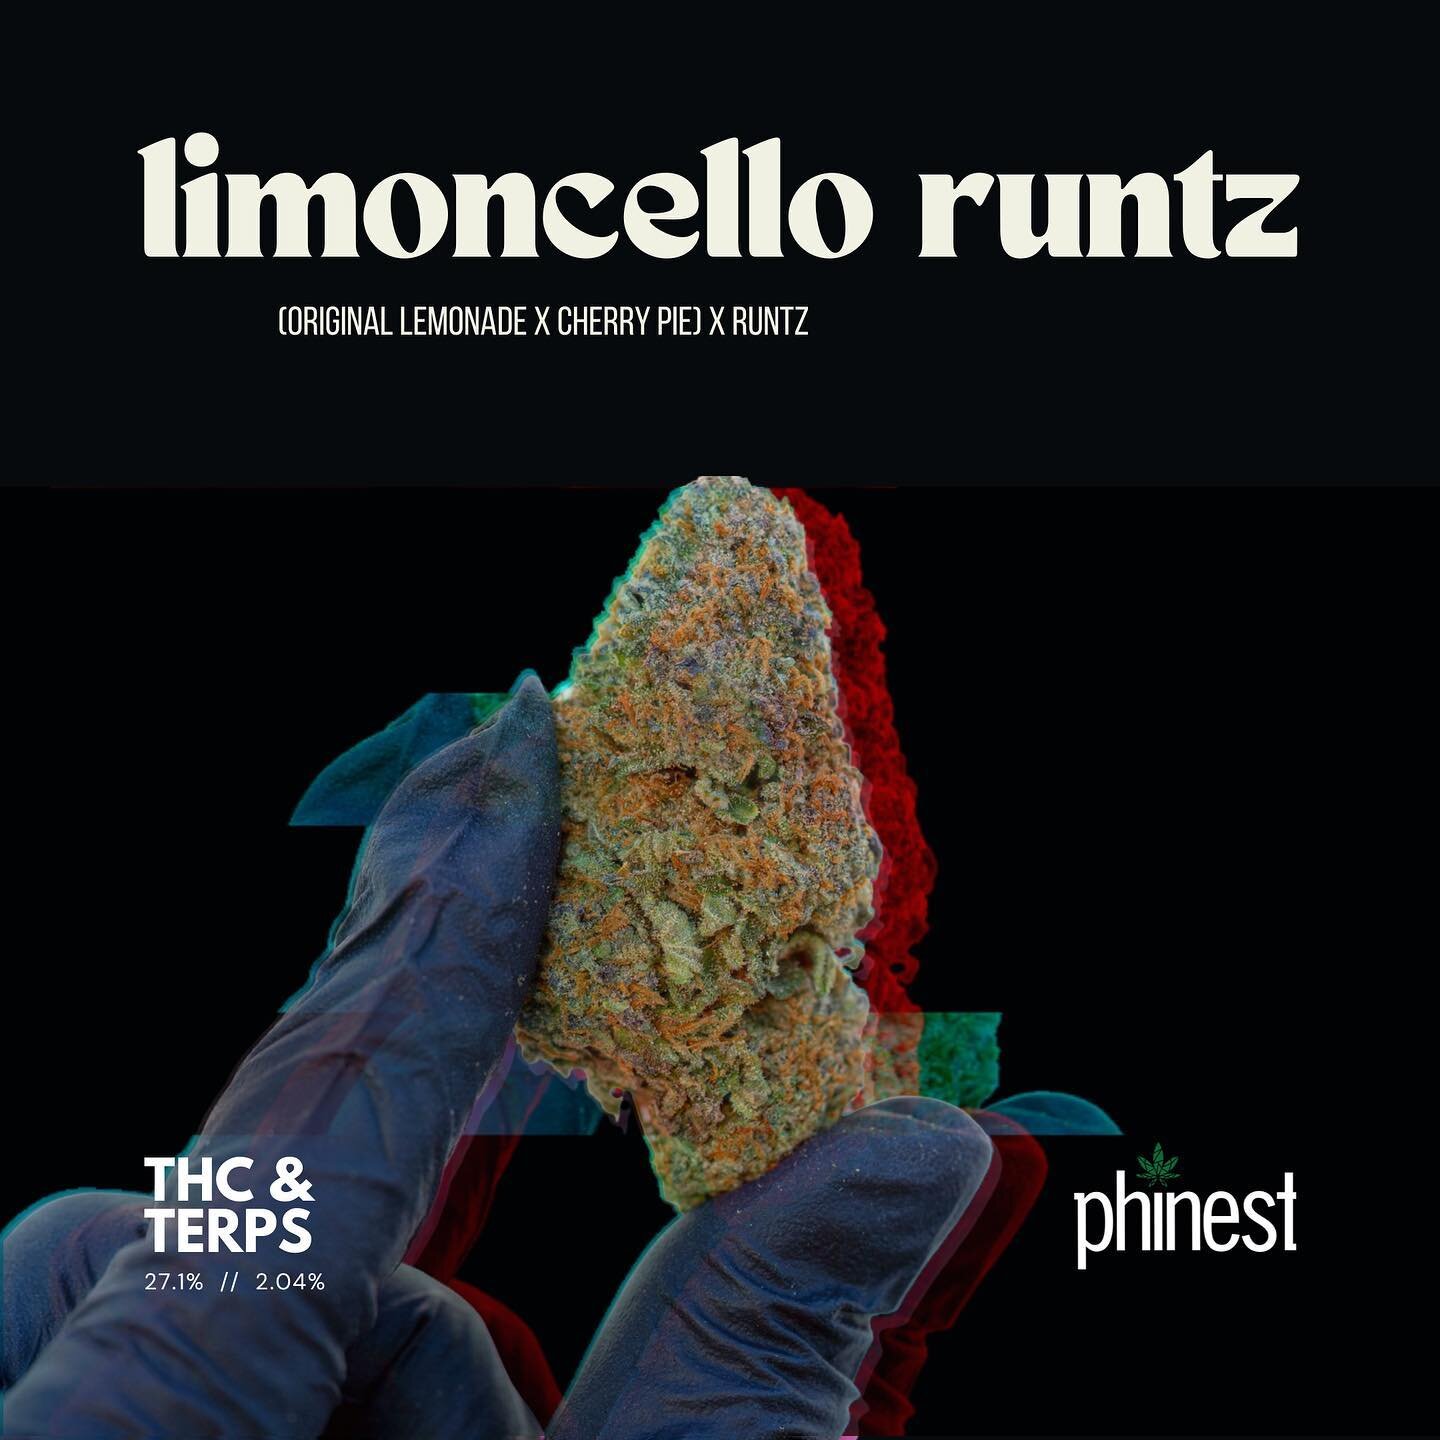 The Runtz cross that performs &amp; yields like indoor even during deps ⚡️ Limoncello Runtz creatively combines three stand-alone stunning cultivars to produce a dense, zesty cross full of unique terpenes including Ocimene, trans-Nerolidol, and &alph